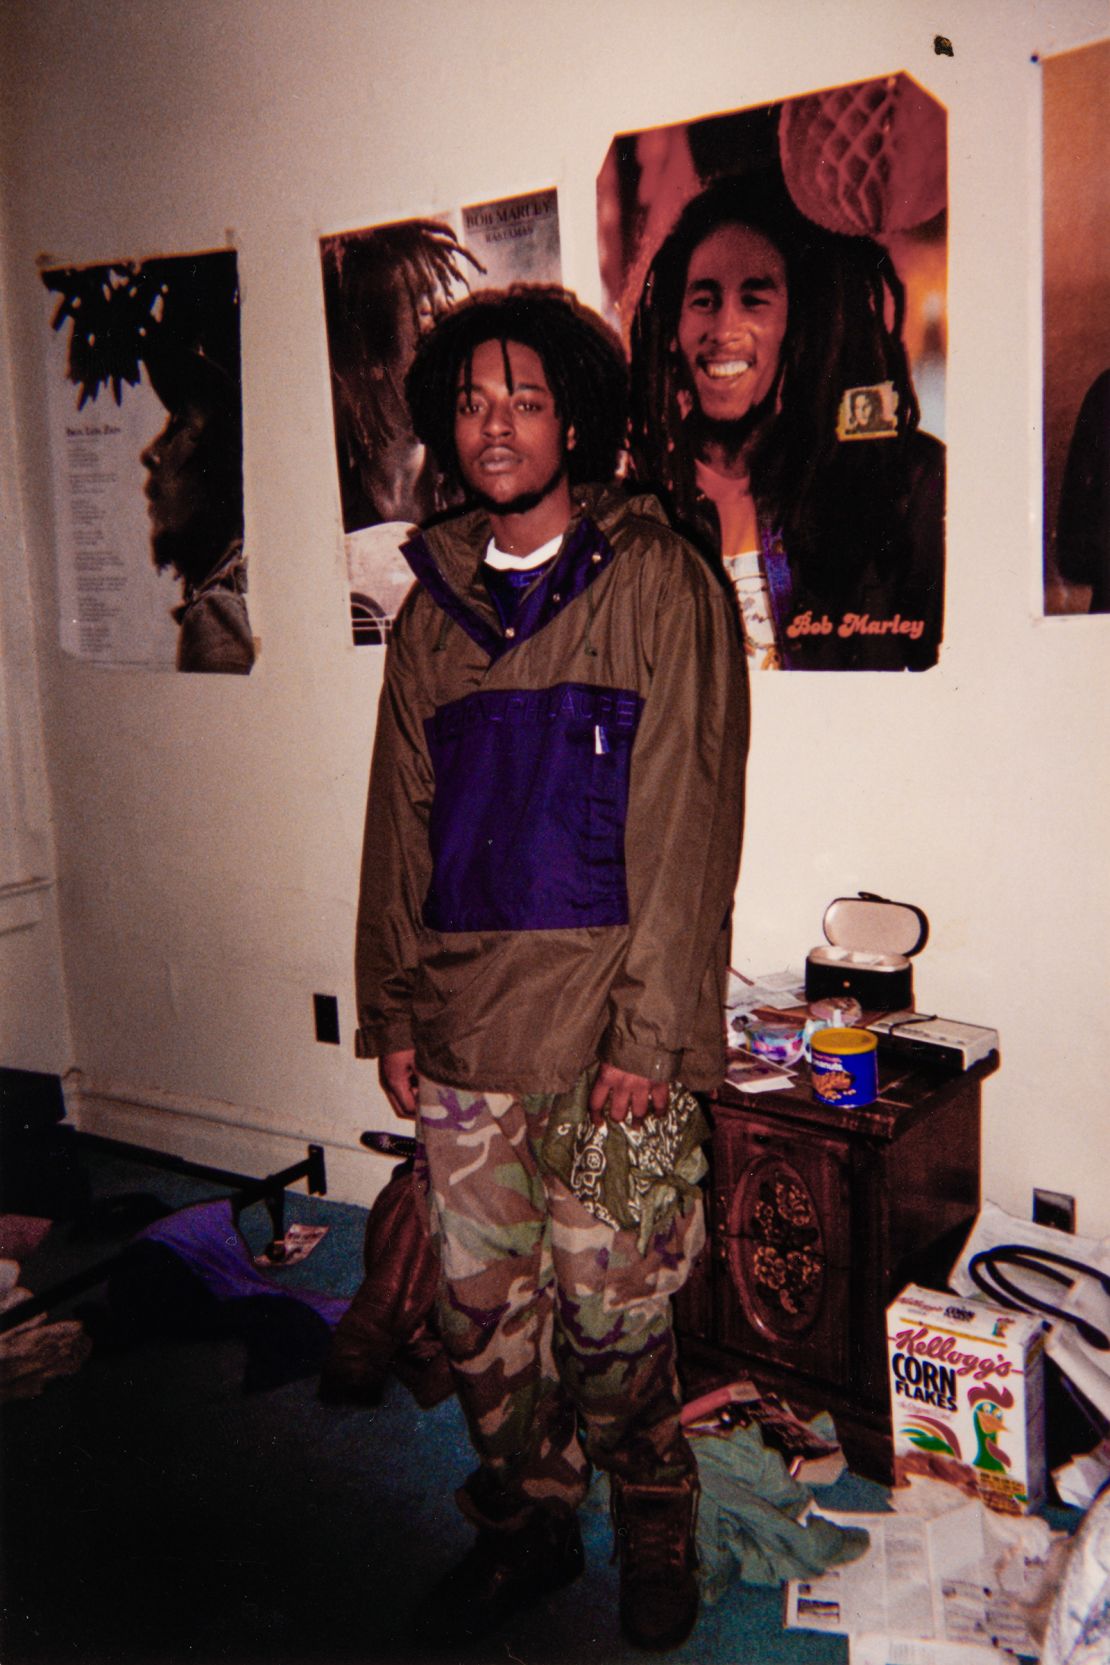 An old photo shows Akil's father, originally from Jamaica, with posters of reggae legend Bob Marley.